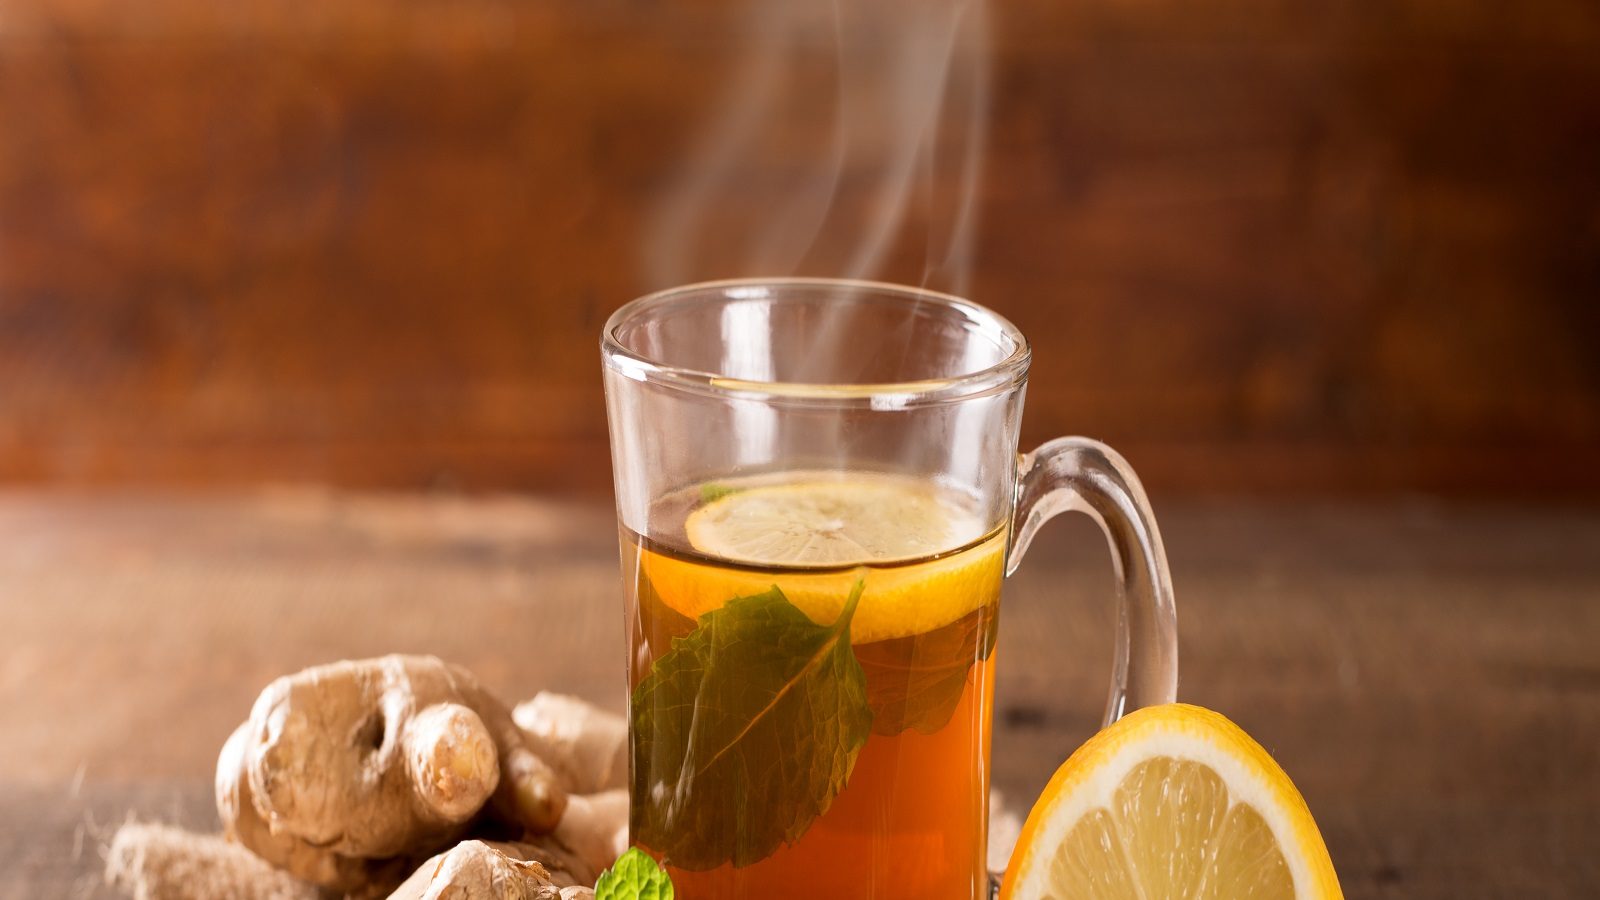 Do drink lemon tea to increase immunity, weight is also low/Lemon tea benefits good for immunity and weight control